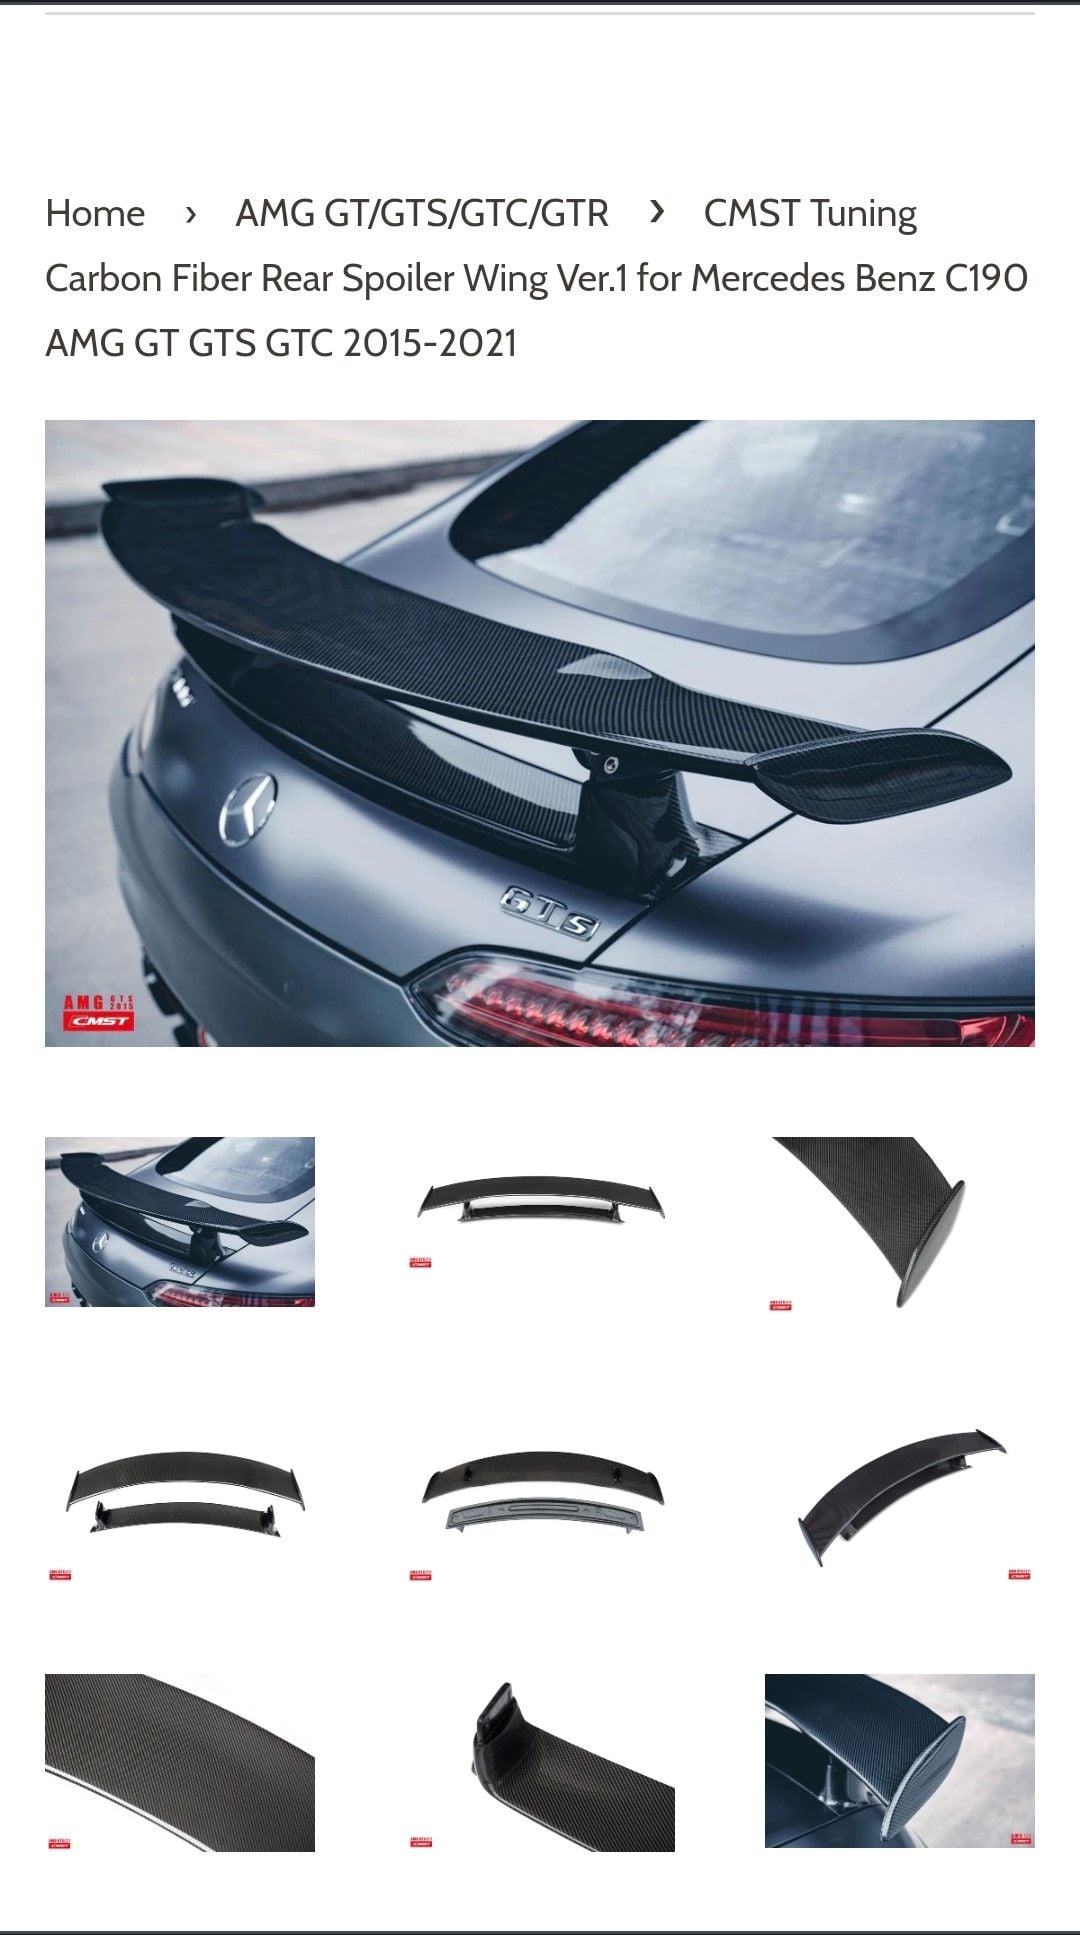 Exterior Body Parts - CMST Tuning Carbon Fiber Rear Spoiler Wing Ver.1 for Mercedes Benz C190 AMG GT GTS GT - Used - 2015 to 2021 Mercedes-Benz AMG GT S - 2018 to 2021 Mercedes-Benz AMG GT R - 2018 to 2021 Mercedes-Benz AMG GT R - Edmonton, AB T6W 4J, Canada